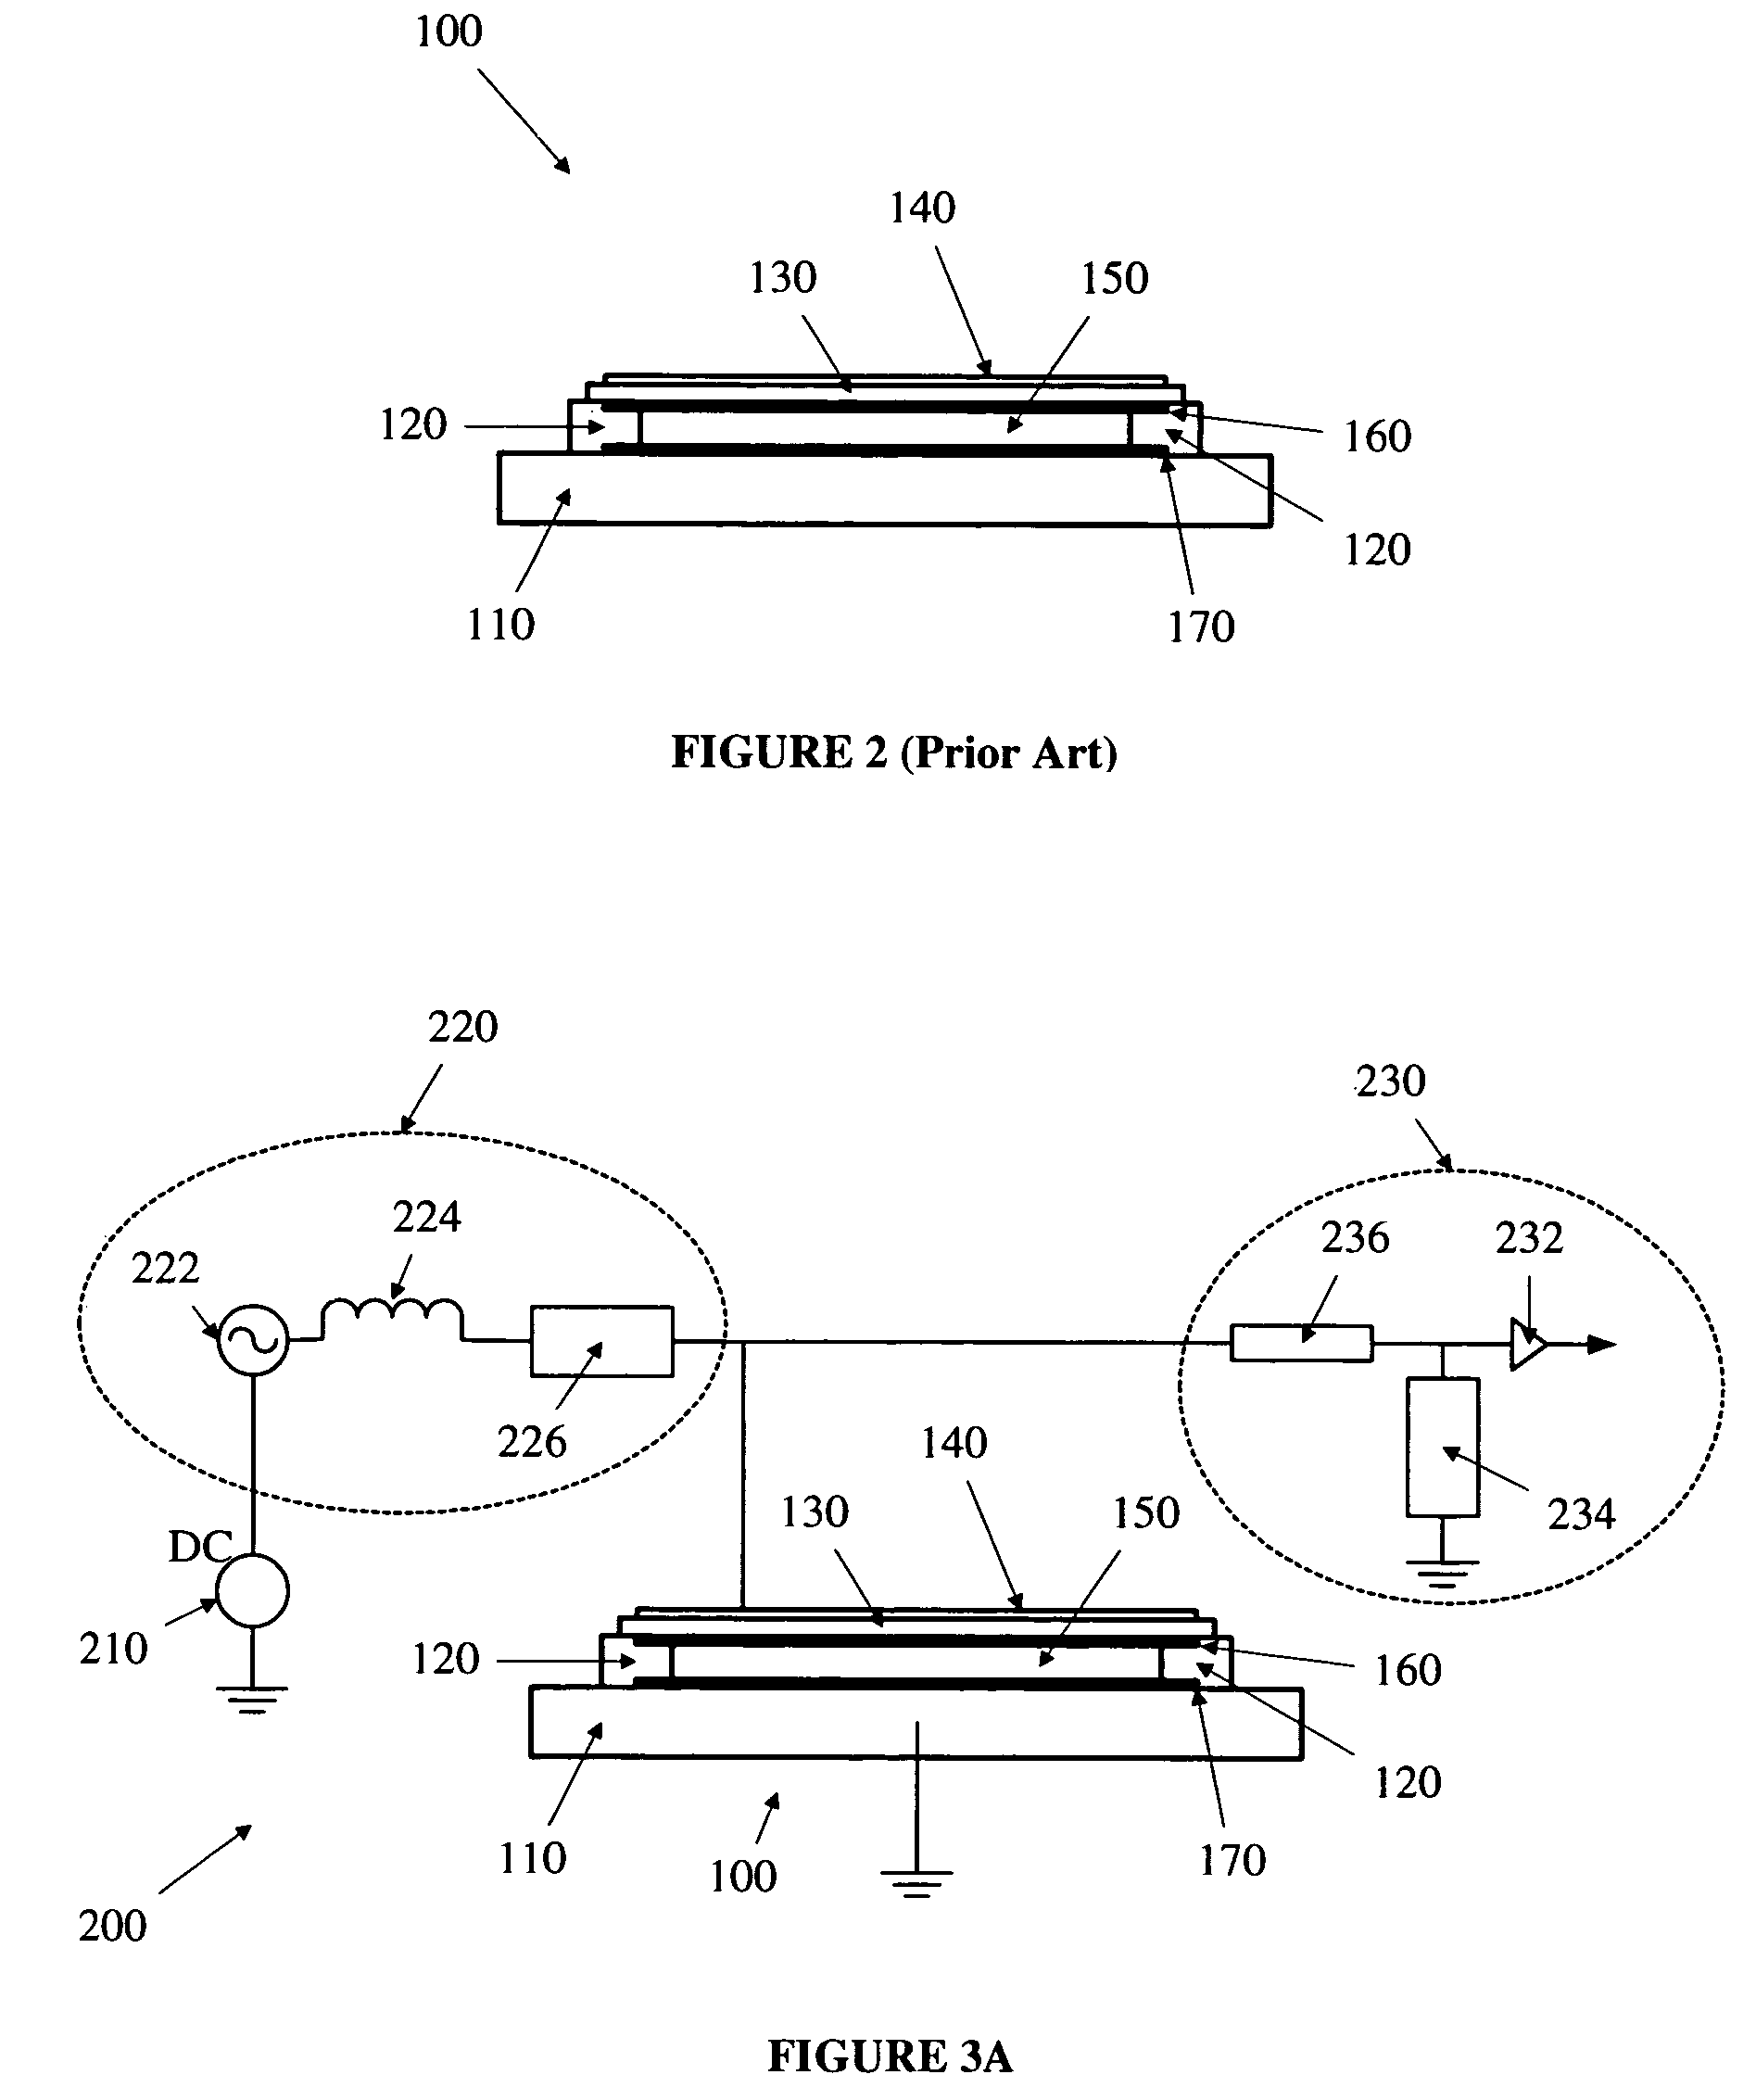 Electric circuit for tuning a capacitive electrostatic transducer